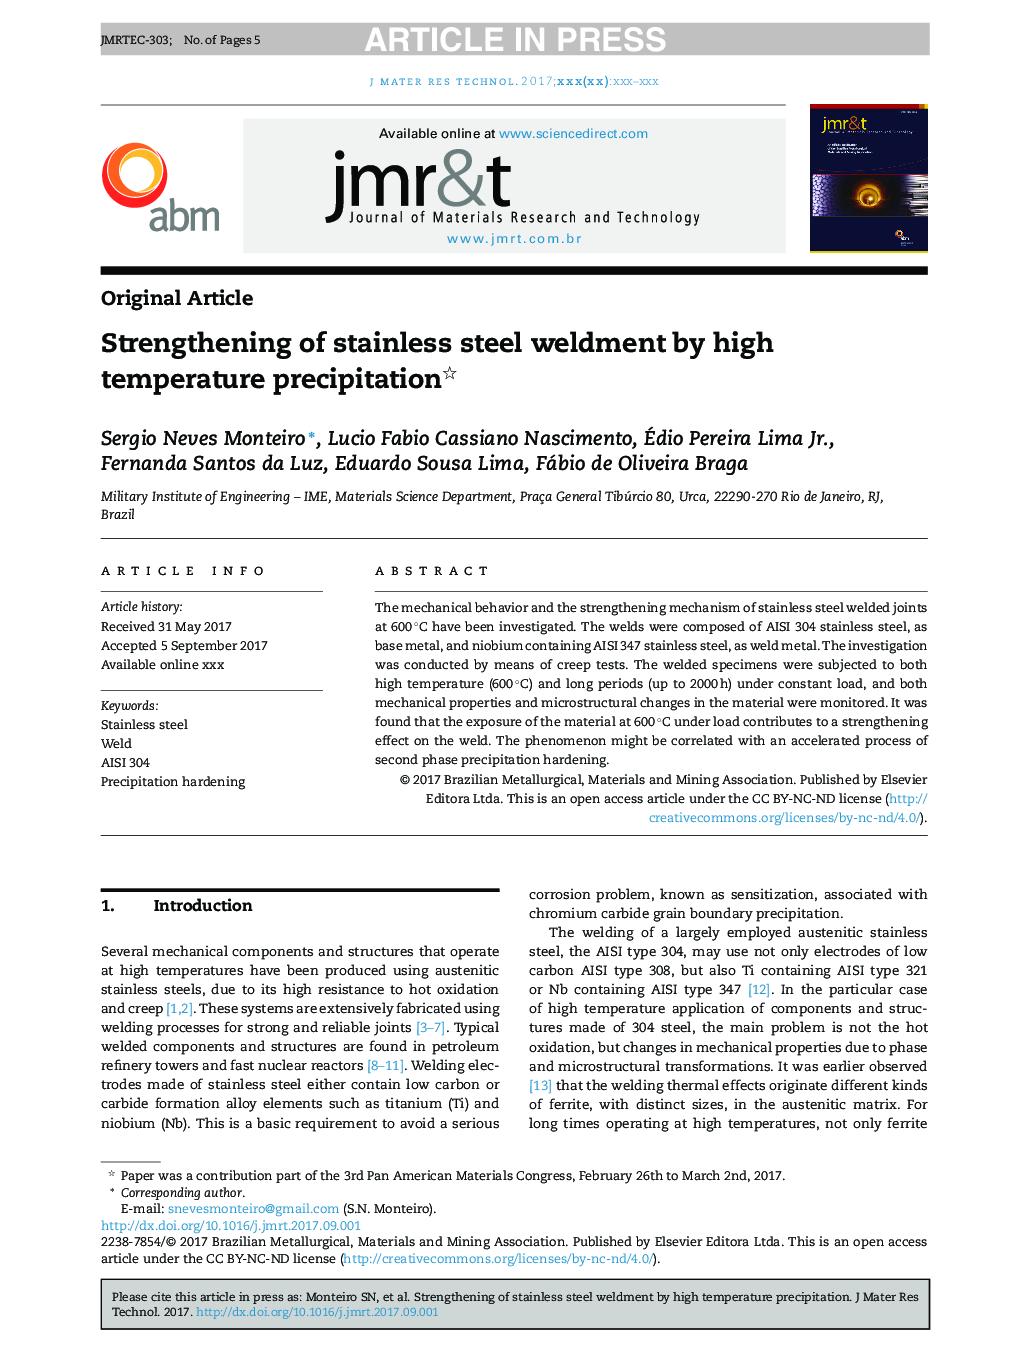 Strengthening of stainless steel weldment by high temperature precipitation